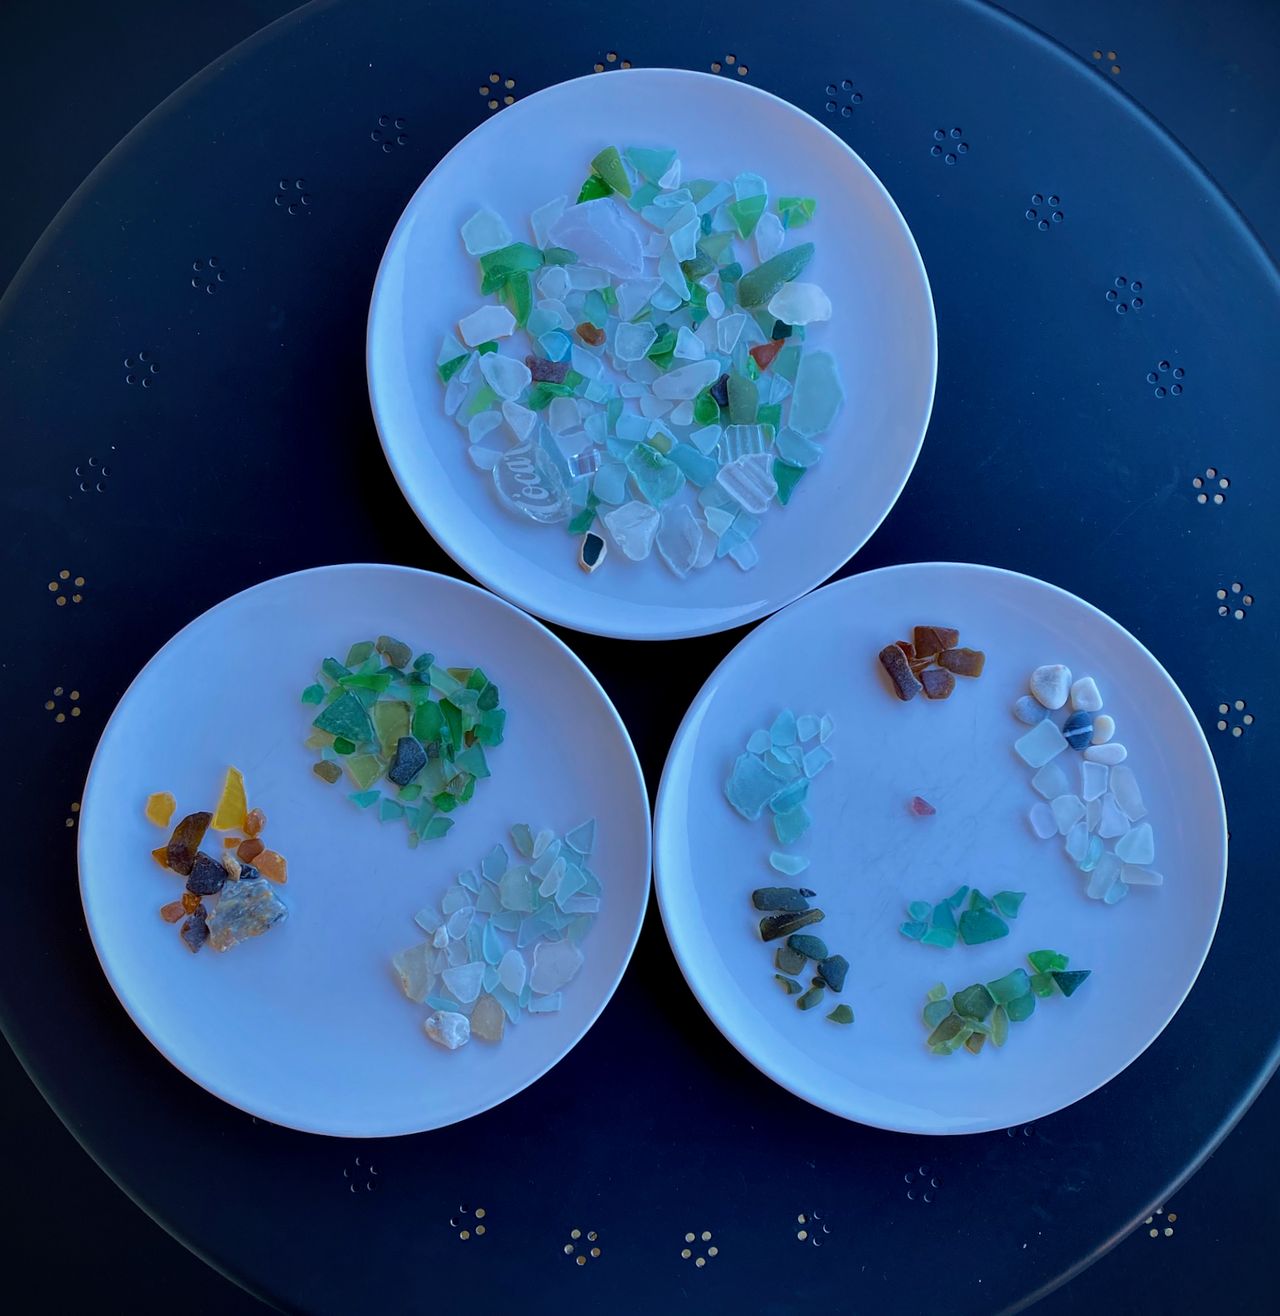 Two plates with beach glass arranged by color, and one plate with all the pieces mixed together